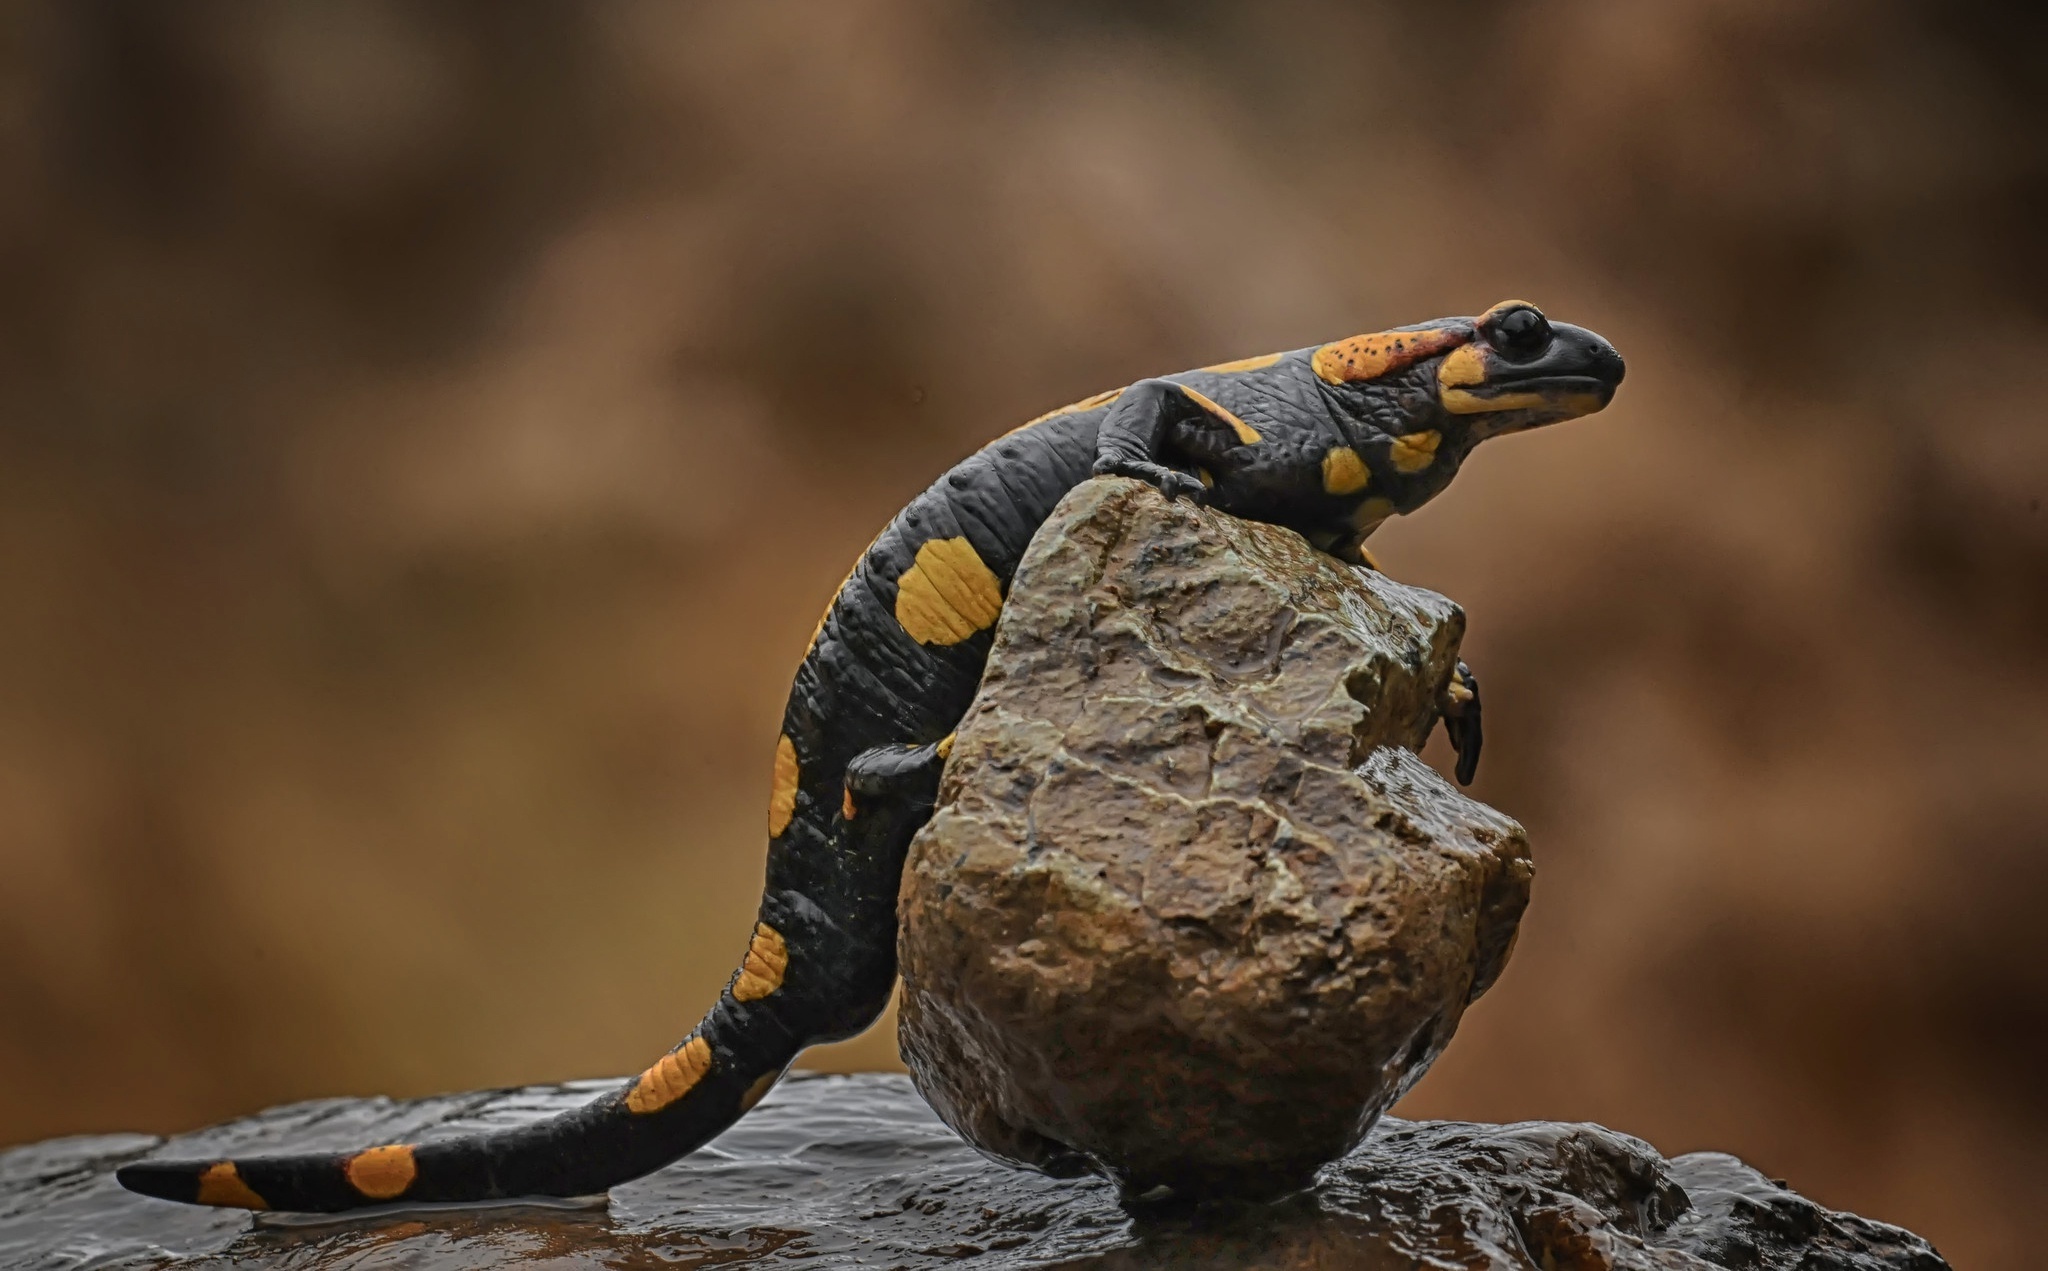 Variety of salamander wallpapers, Nature's unique animals, Wallpaper collection for animal enthusiasts, Reptile beauty, 2050x1280 HD Desktop